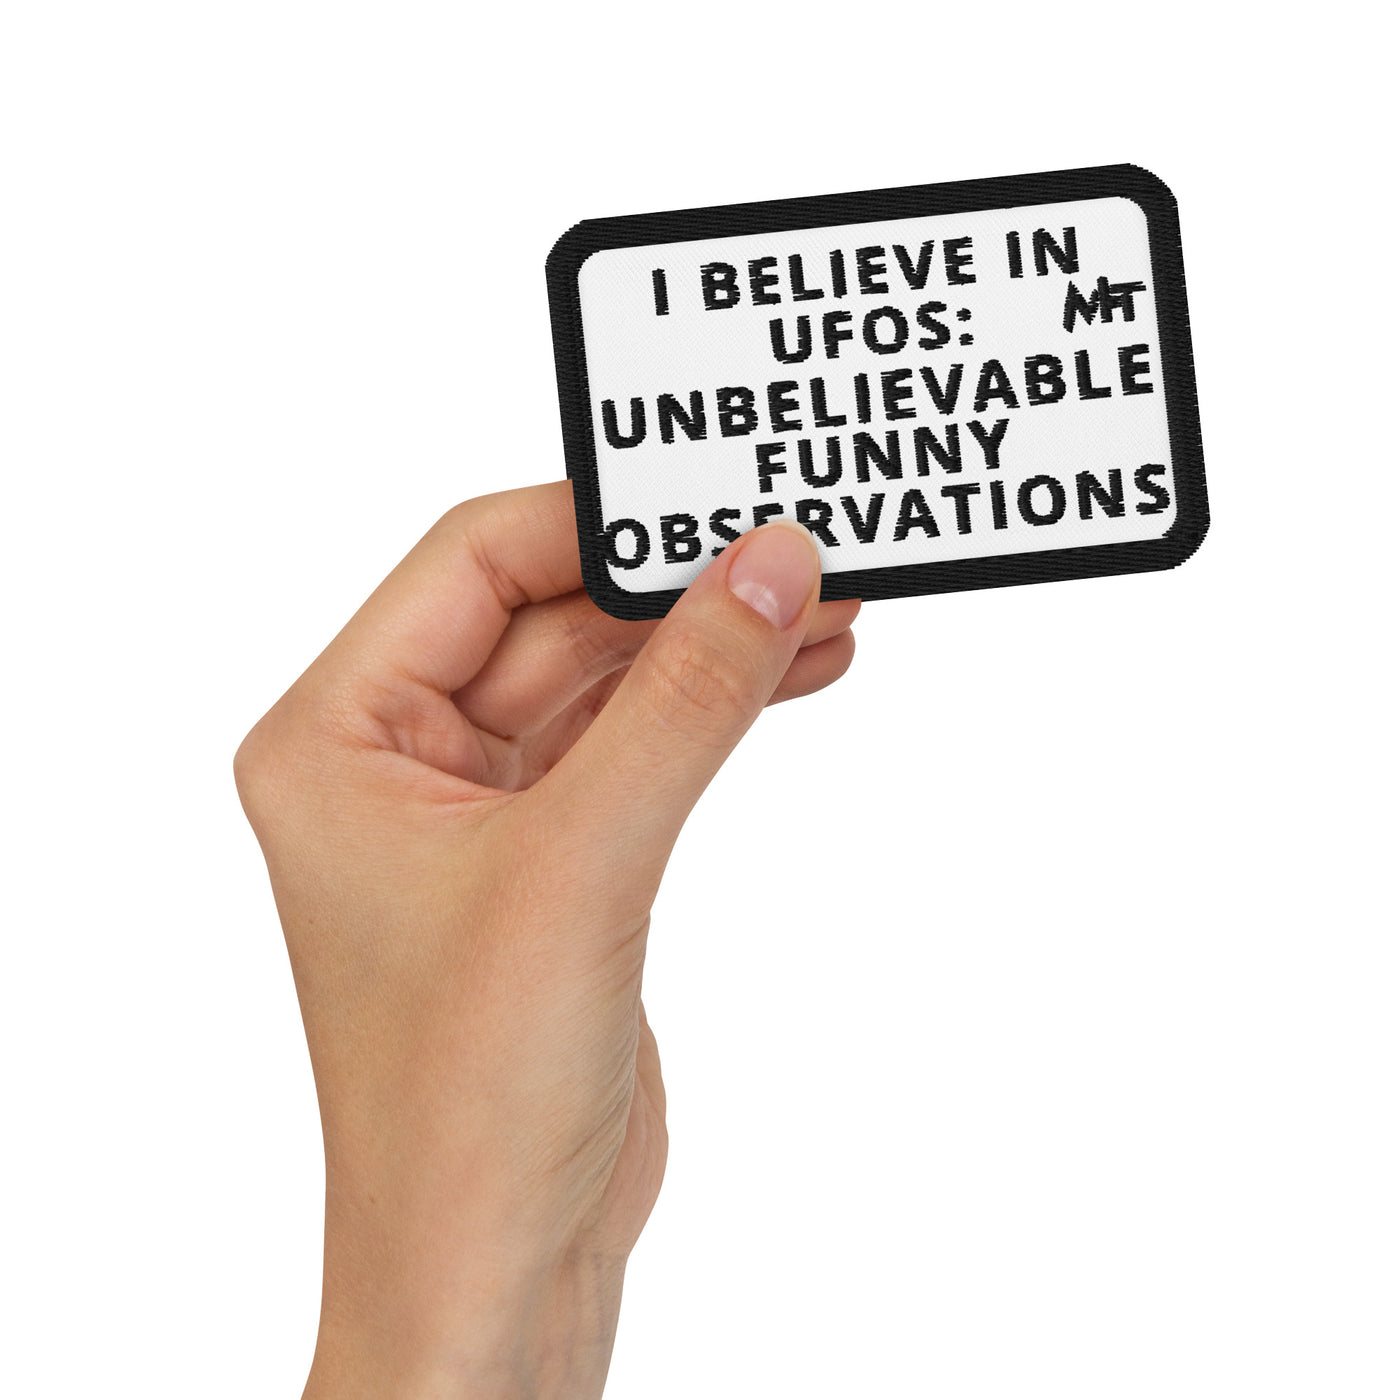 I believe in UFOs: Unbelievably Funny Observations - Embroidered patches